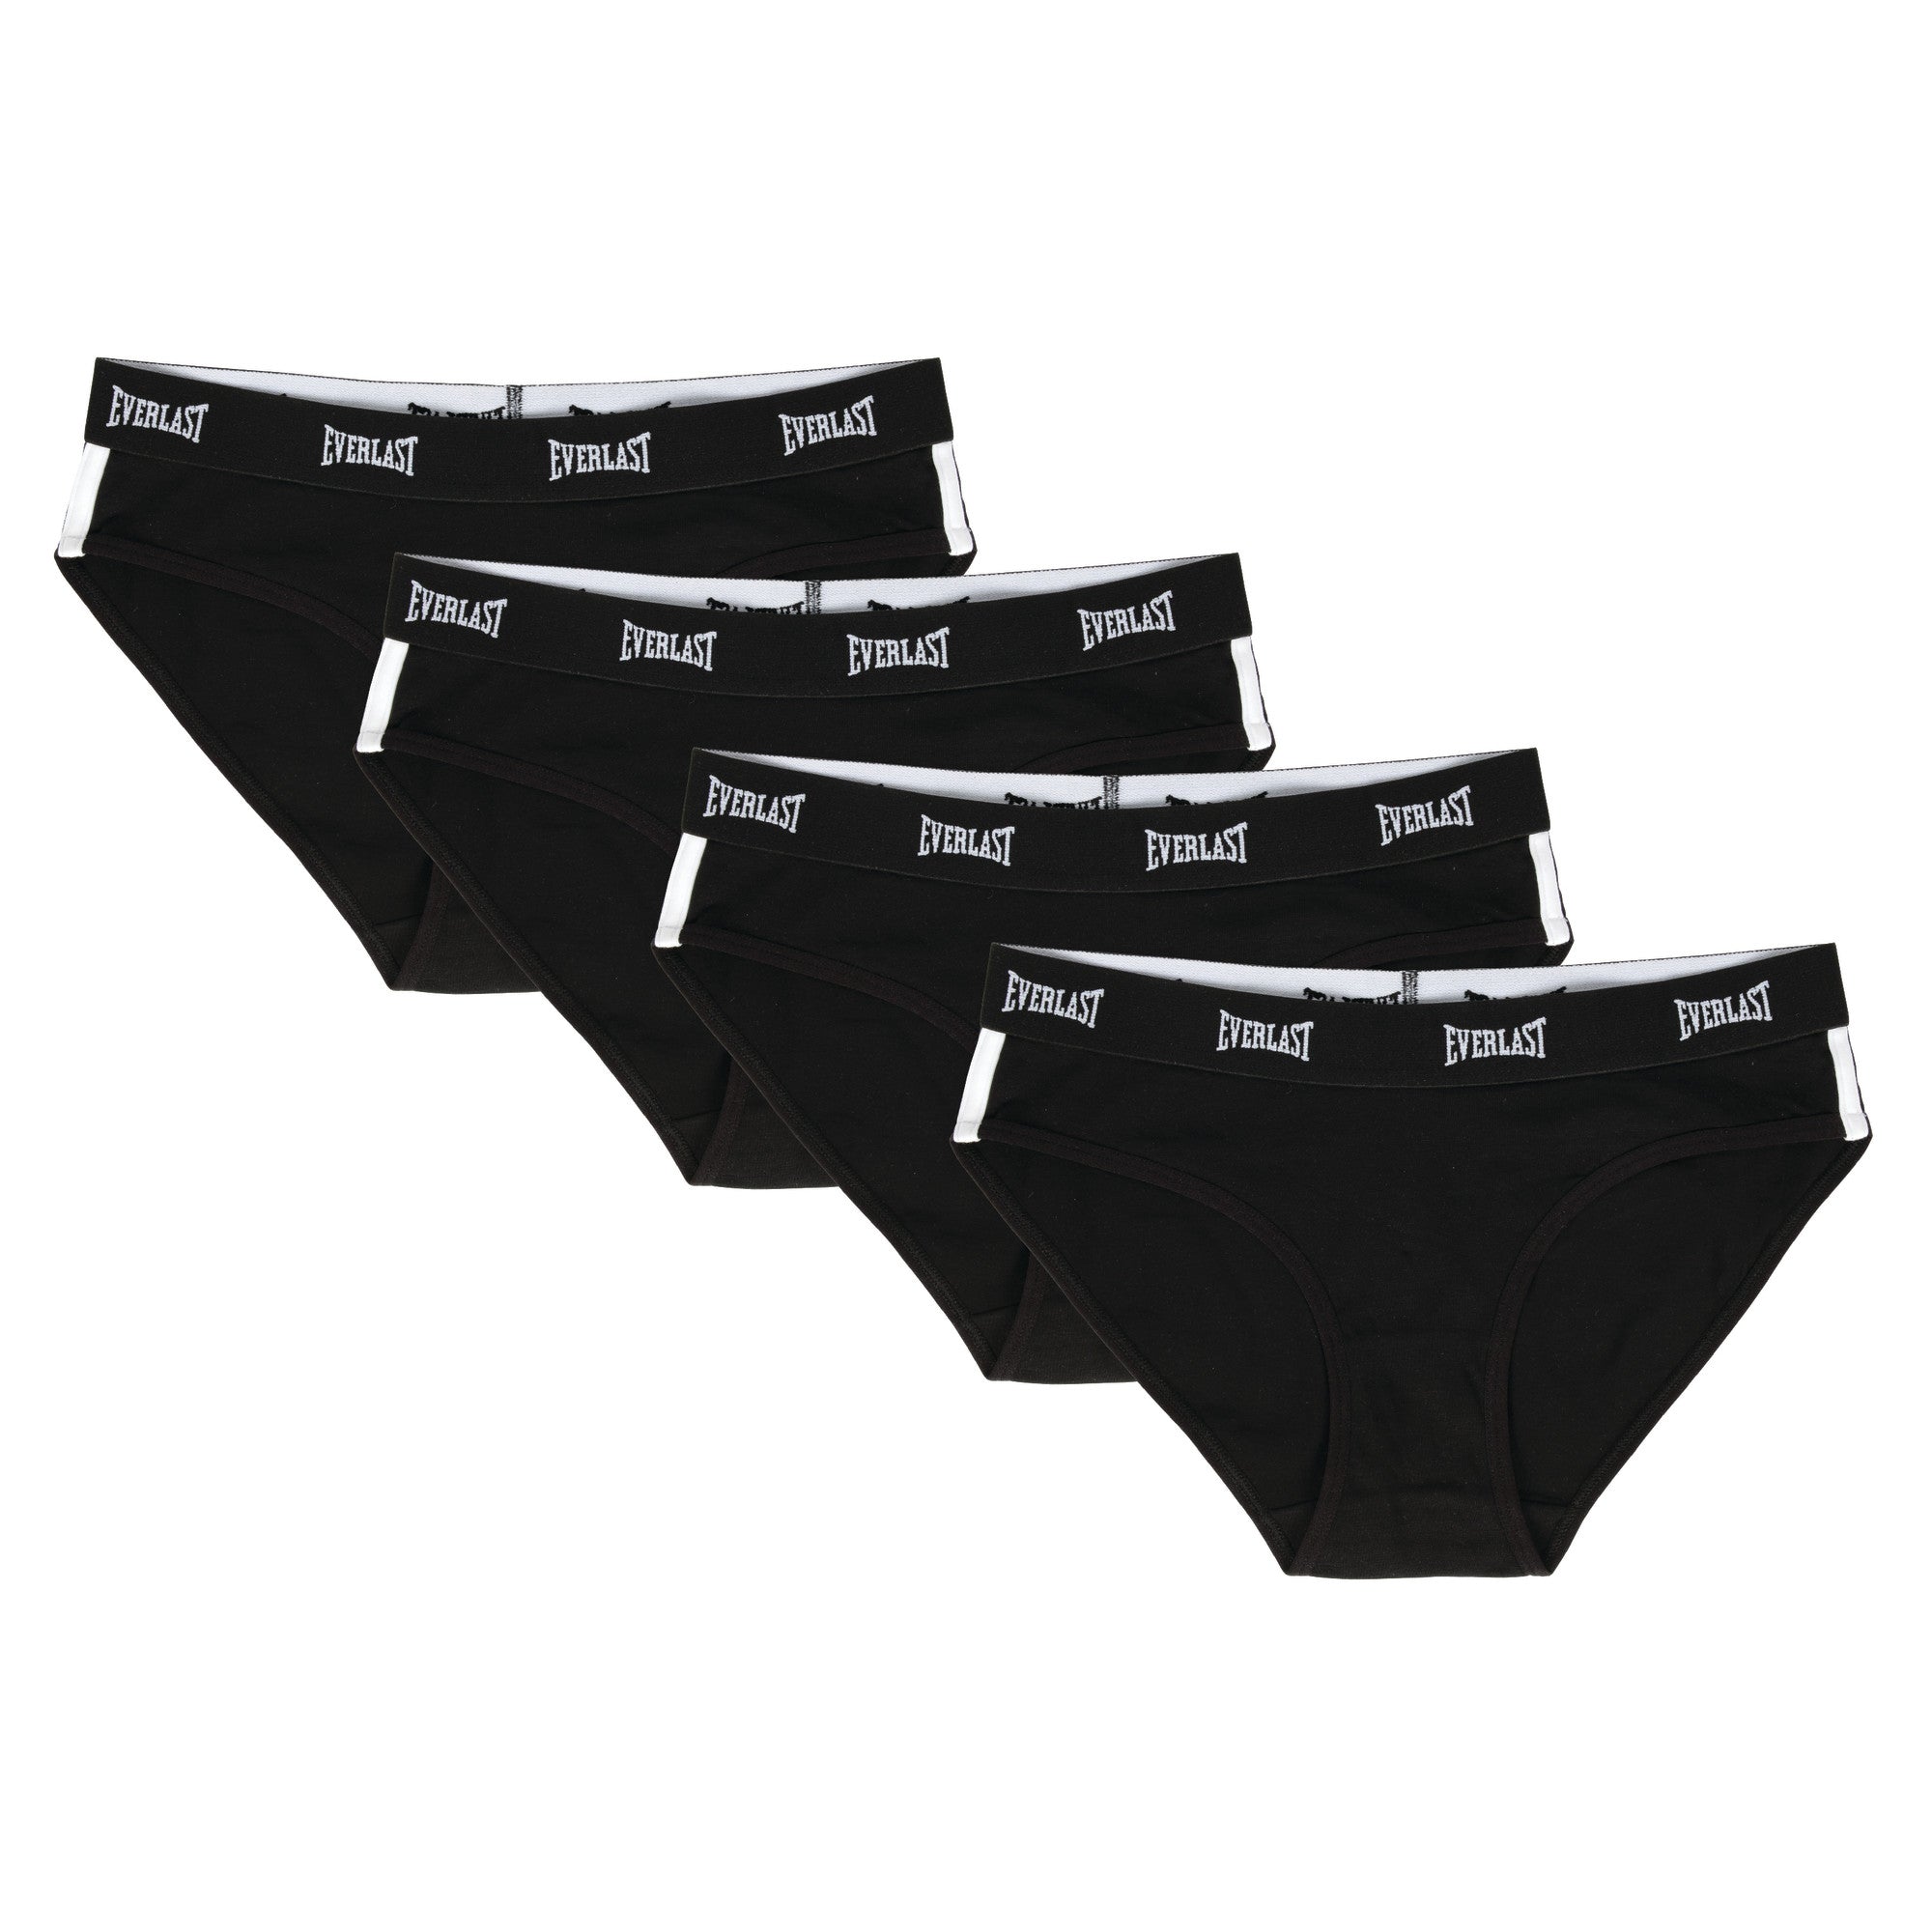  Later Turds Poop Cool Women's Classic Underpants Bikini Briefs  Black : Clothing, Shoes & Jewelry